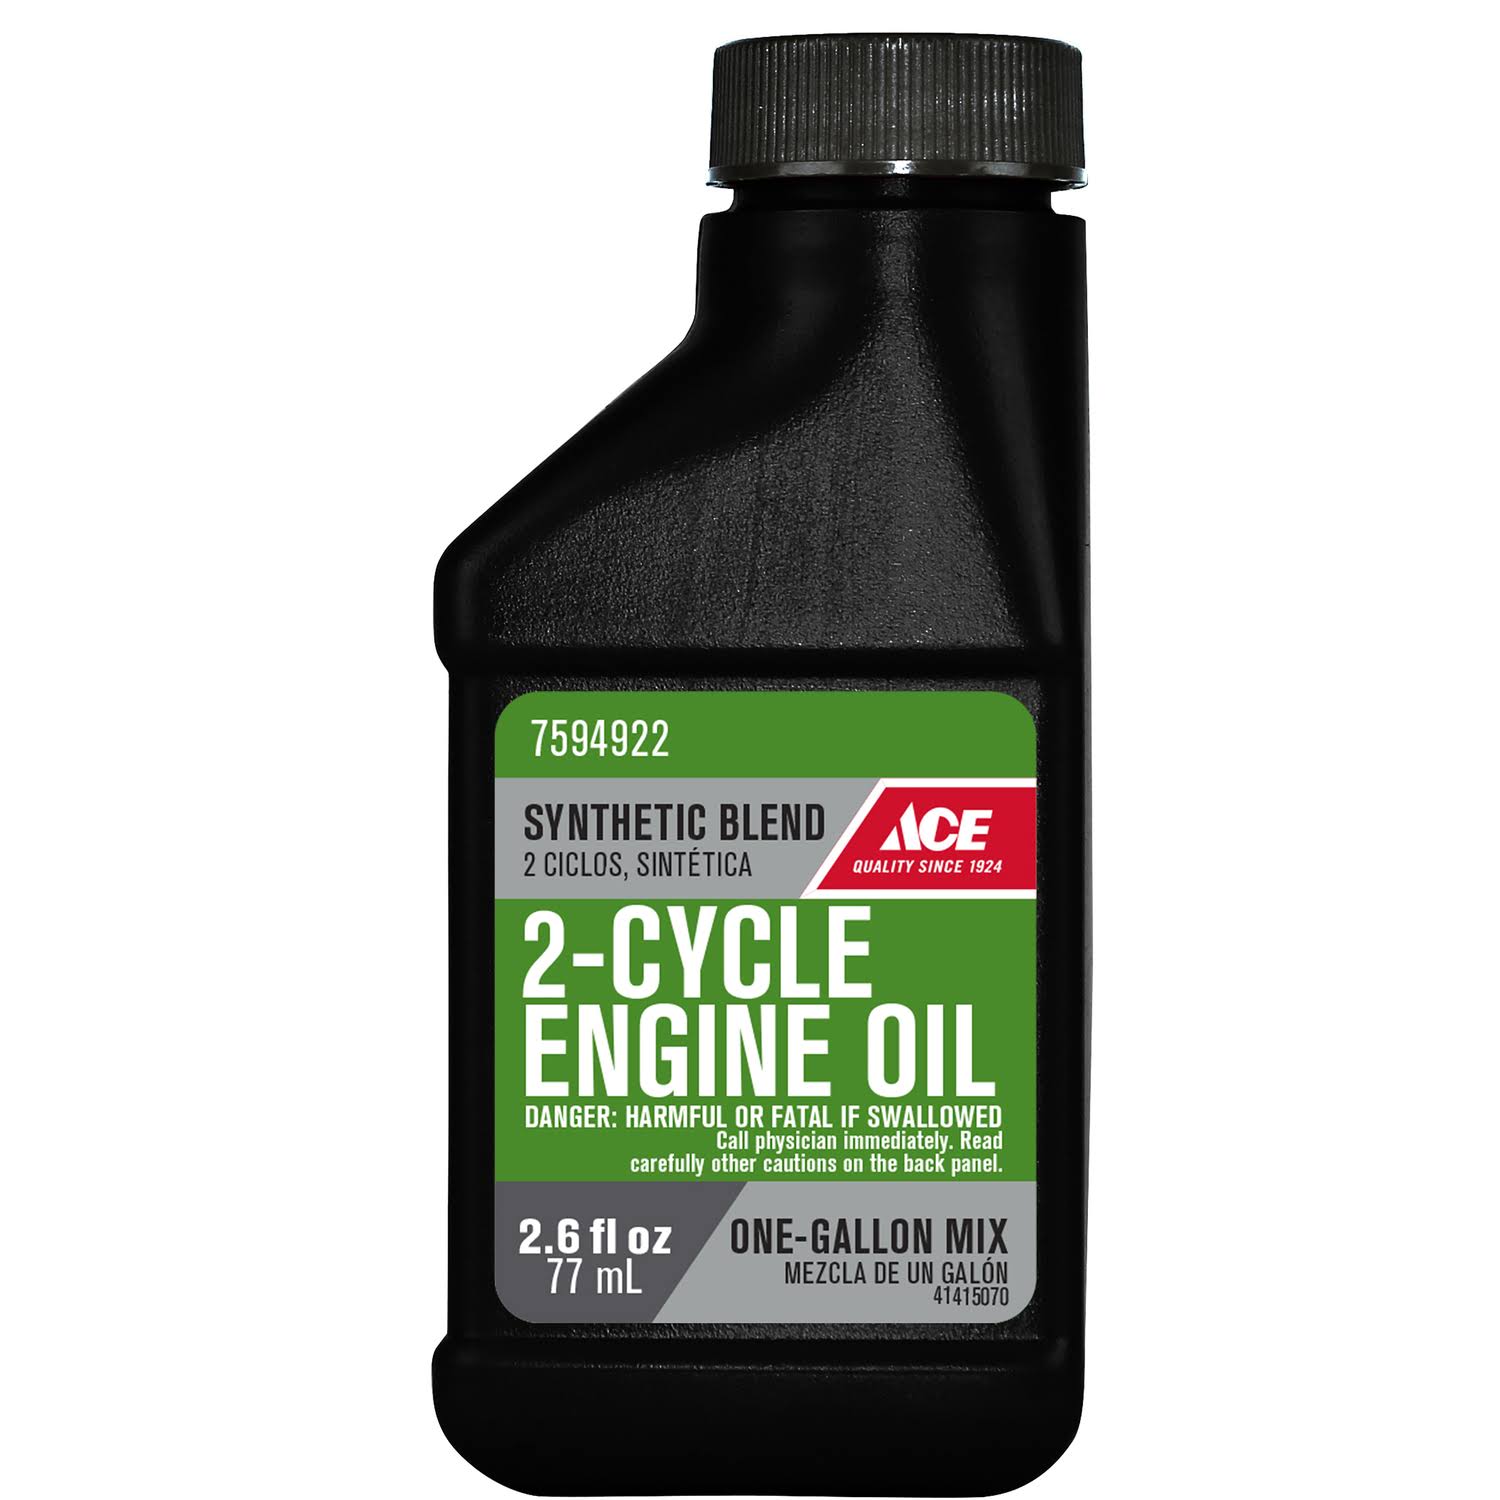 Ace Engine Oil, 2-Cycle, Synthetic Blend - 2.6 fl oz